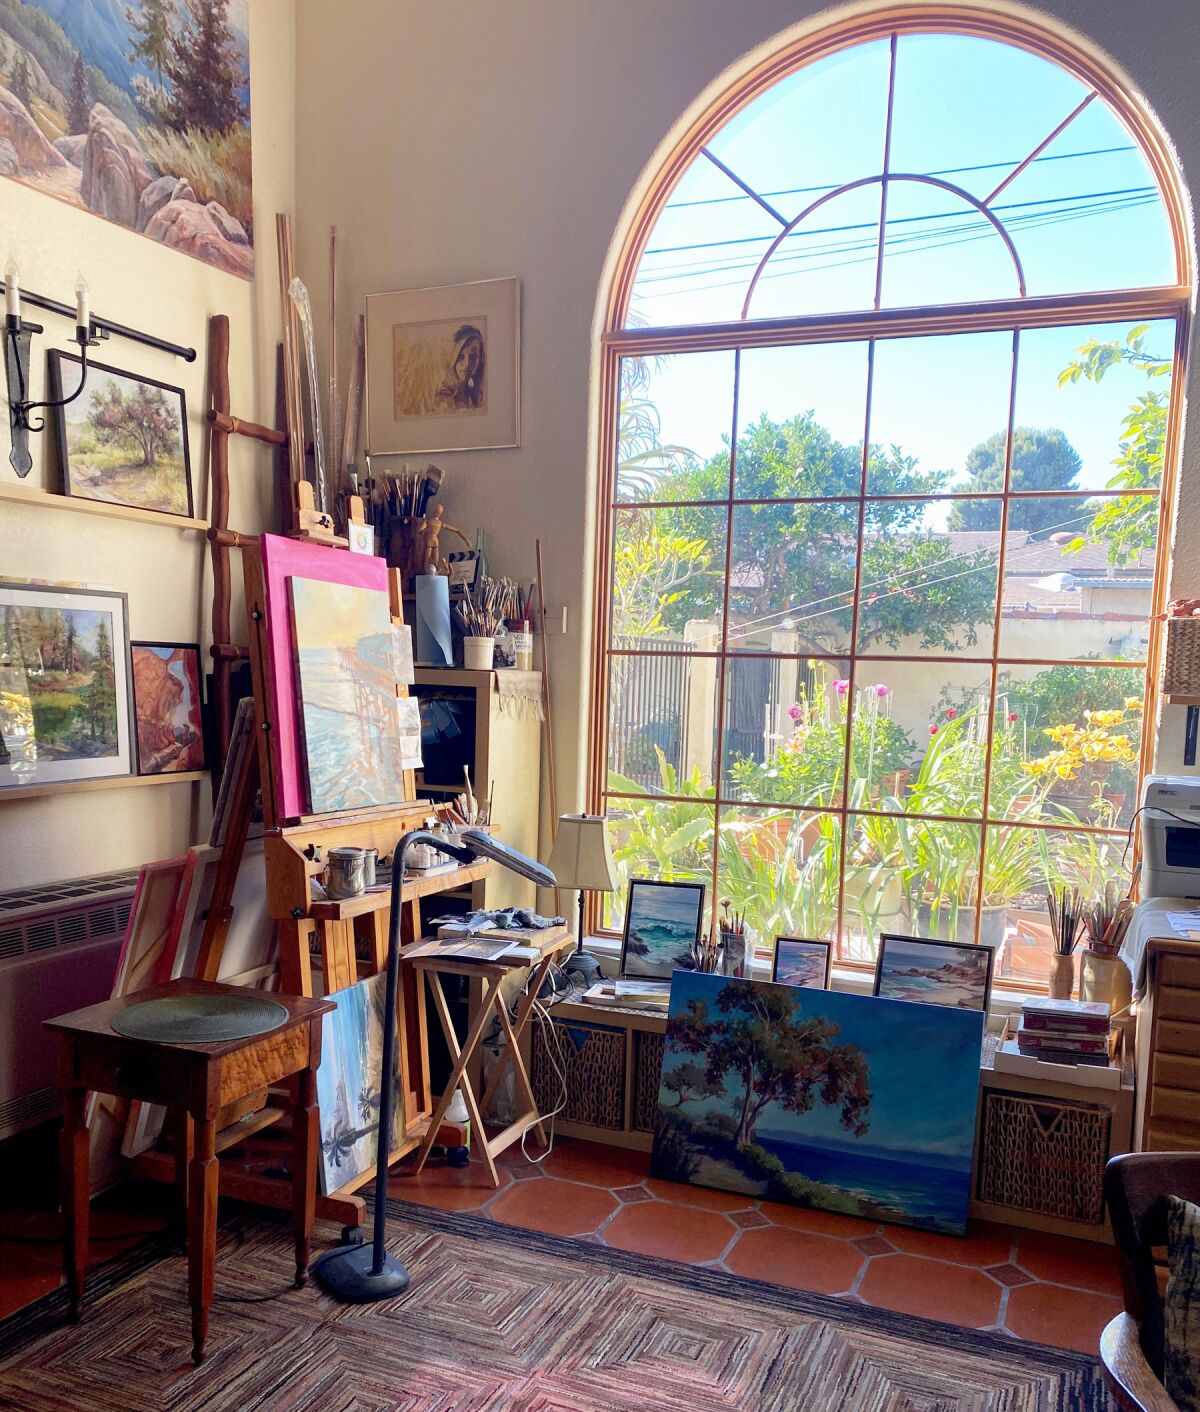 With views inside and out, Dot Renshaw’s art studio in Pacific Beach soars 20 feet in height.